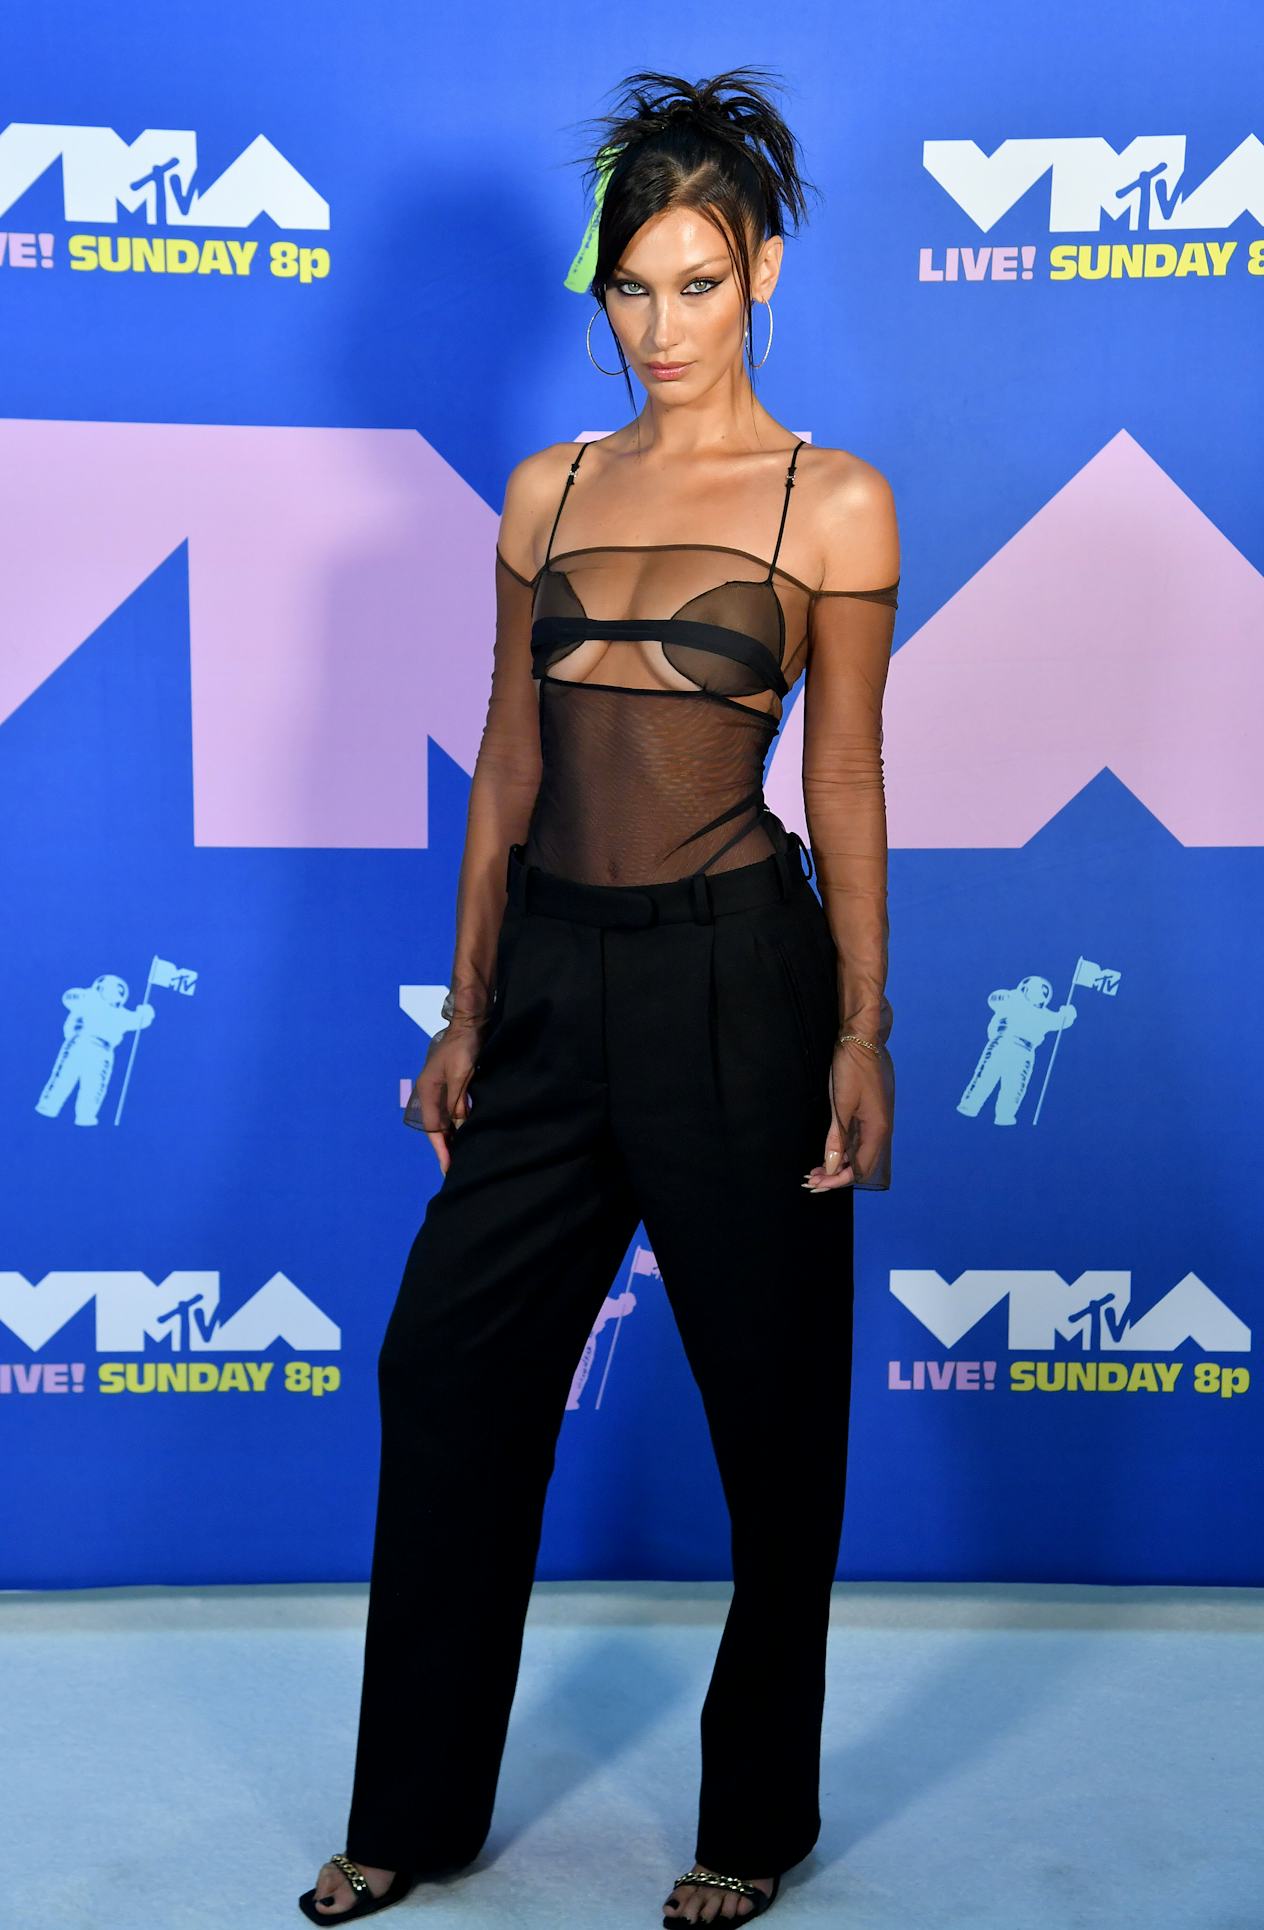 All The 2020 VMAs Red Carpet Looks That Everyone's Talking About